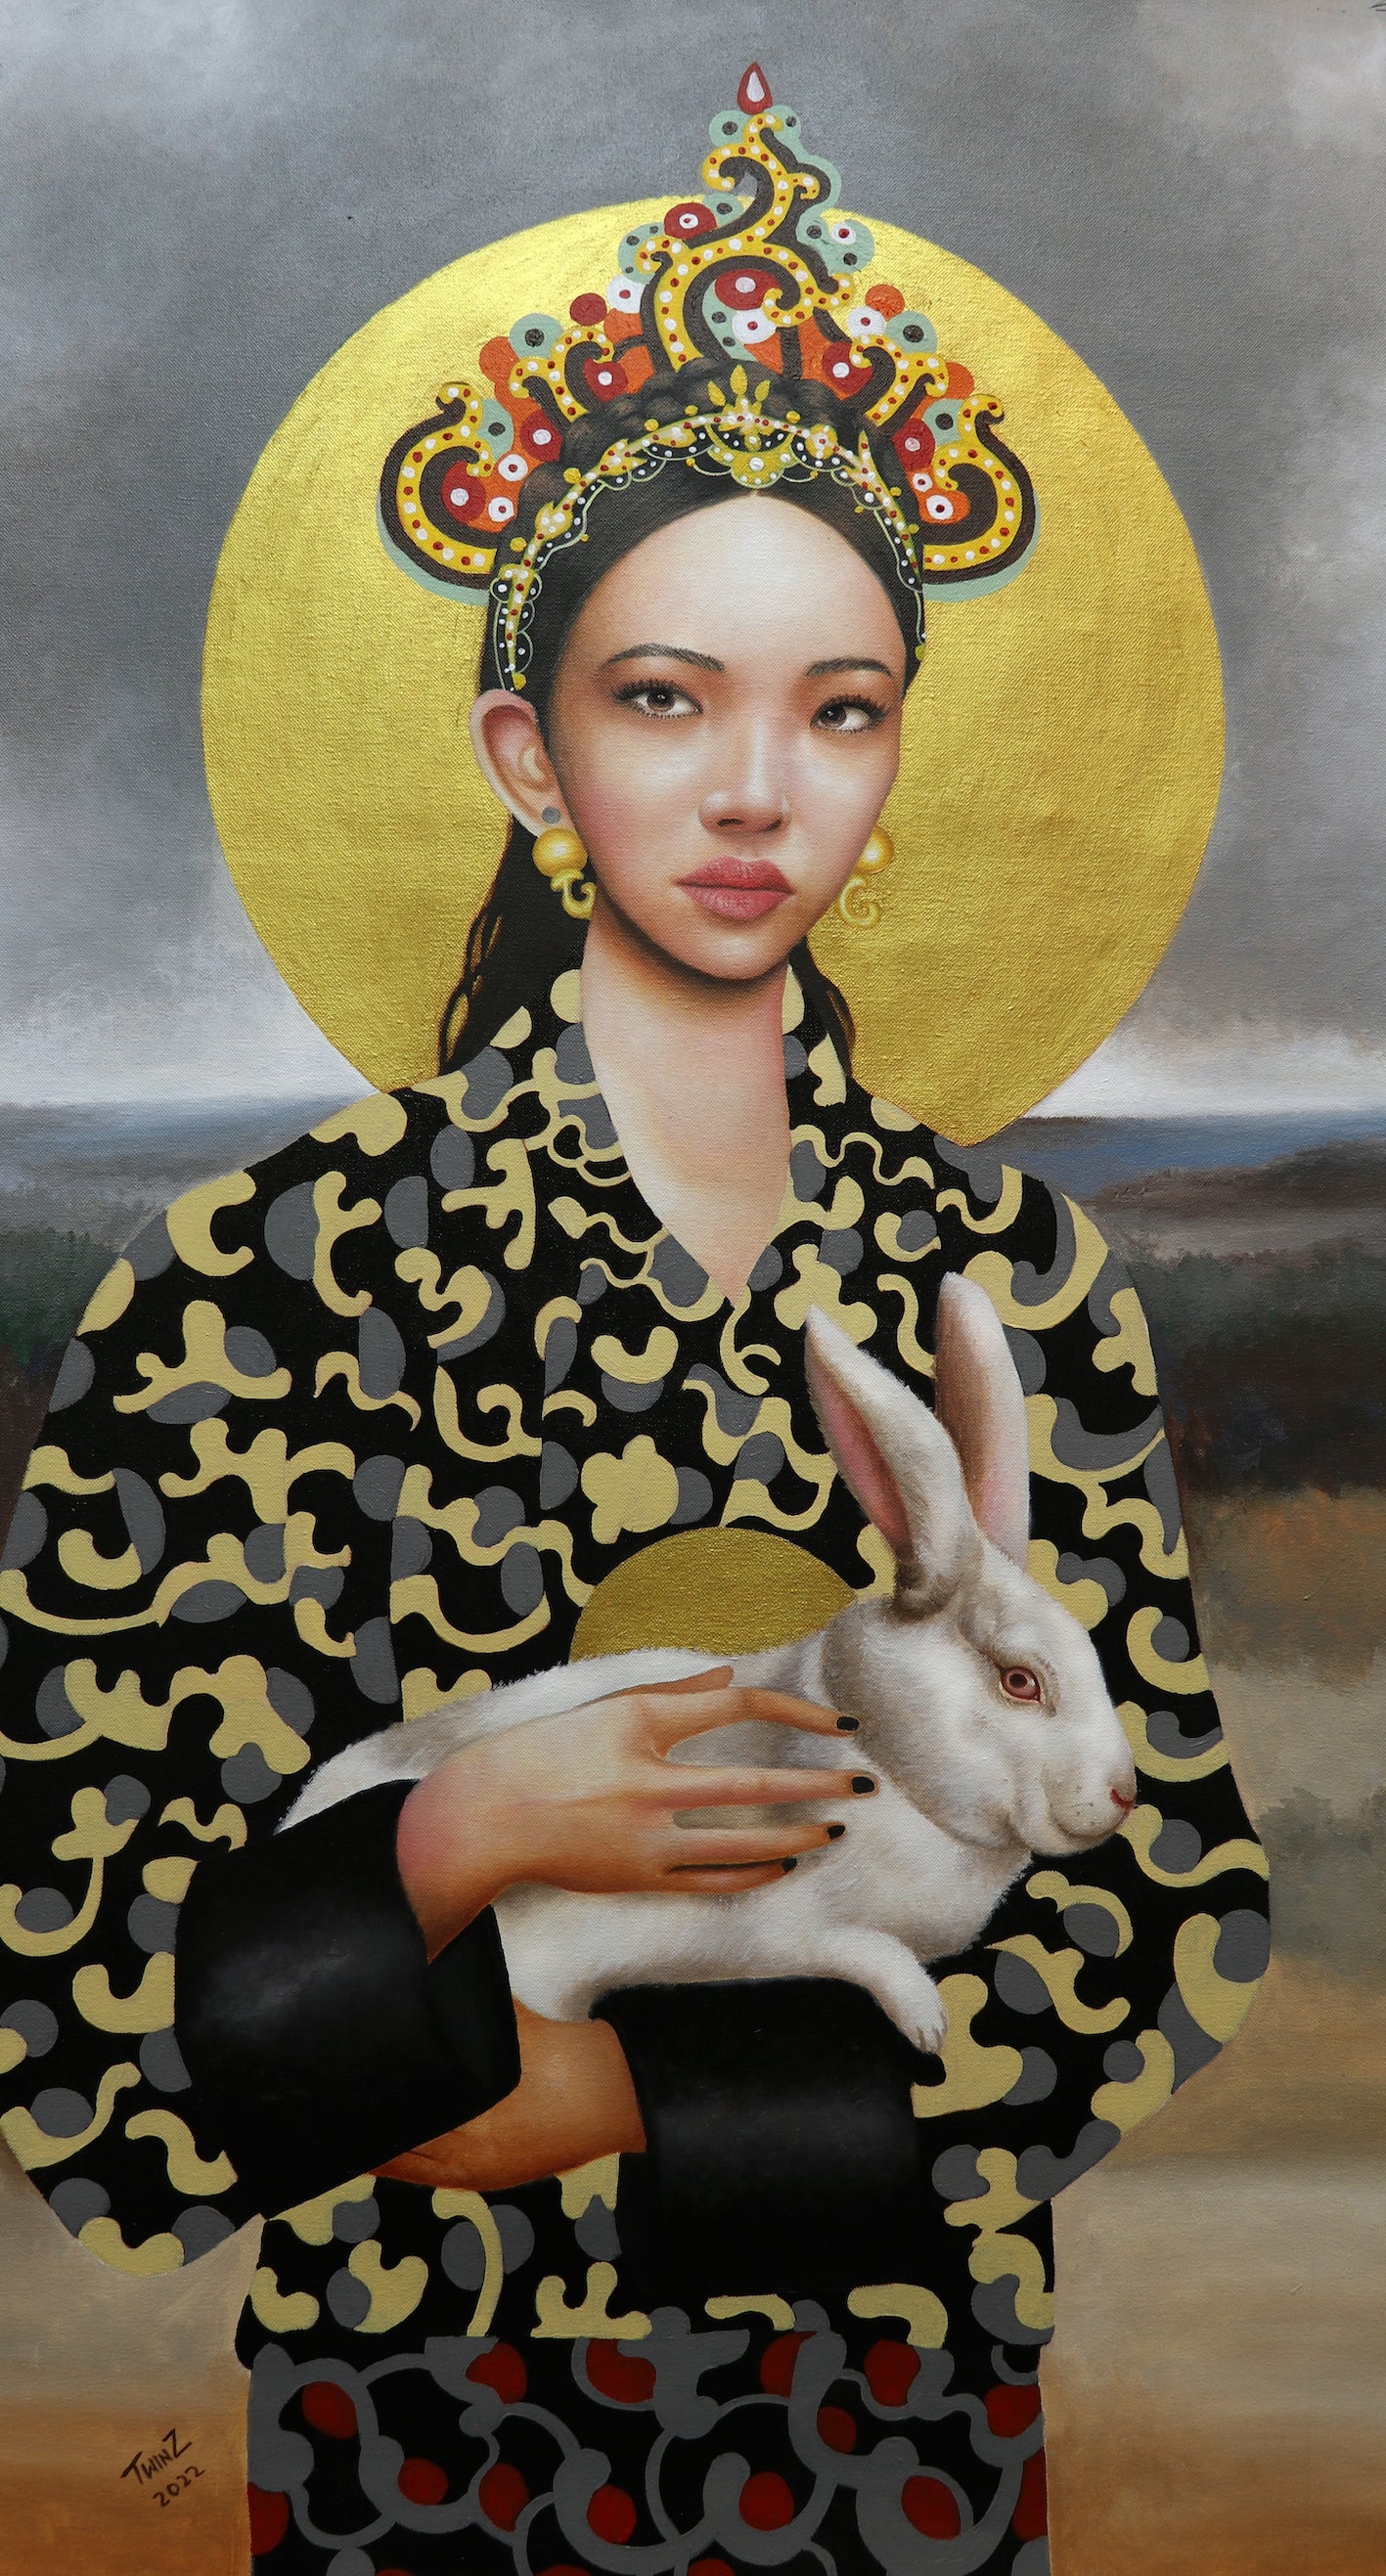 'LADY WITH A RABBIT' - Contemporary Bhutanese Painting - InspiredByBhutan